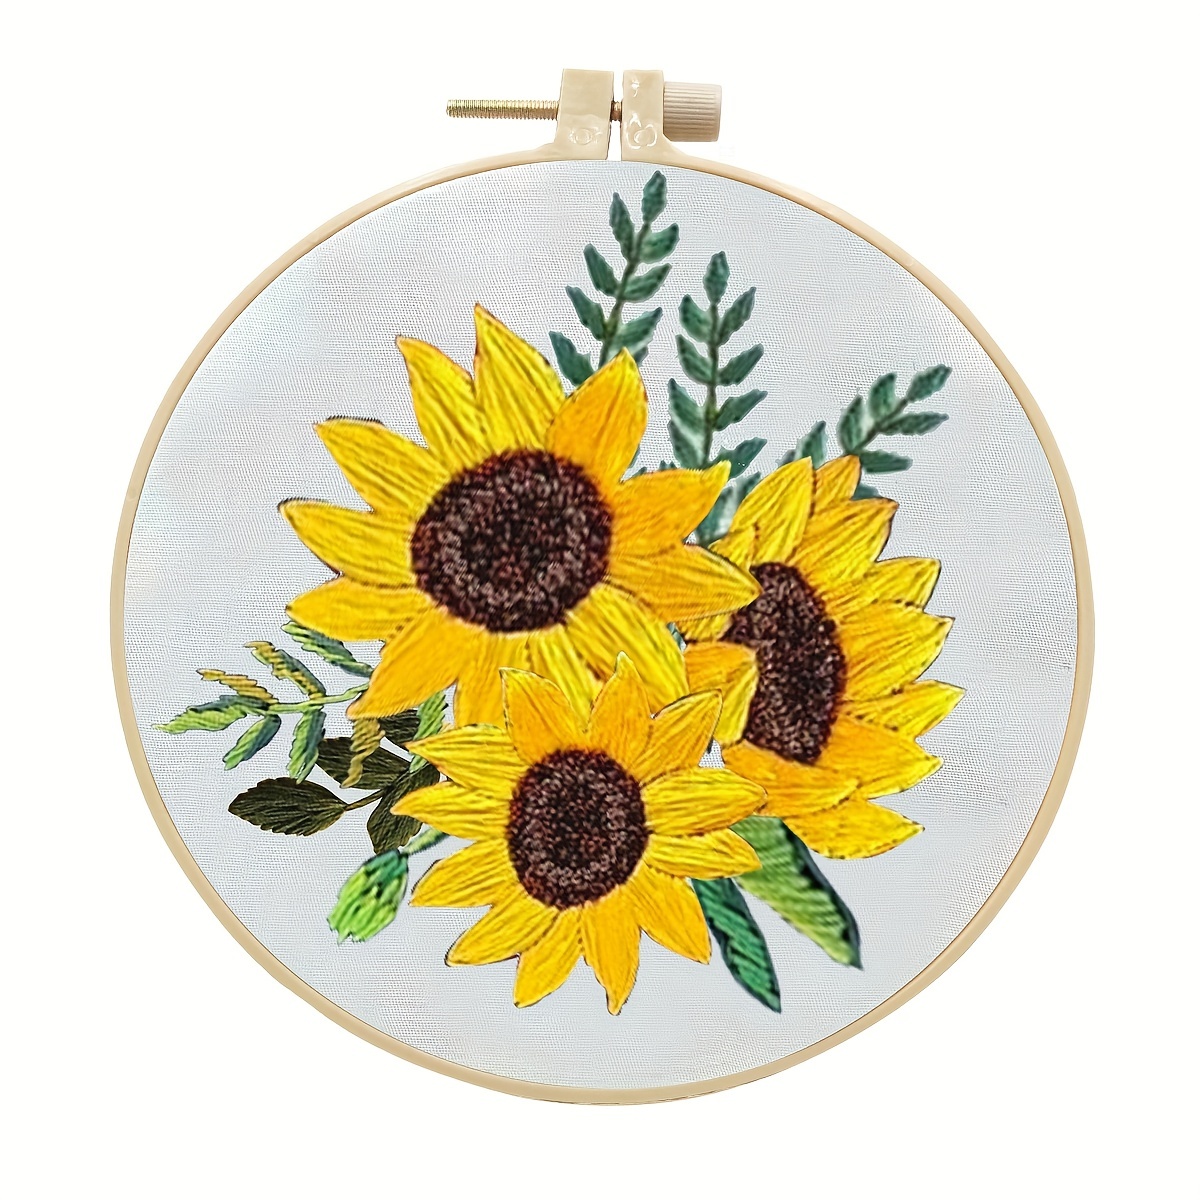 4 Set Embroidery Kit for Beginners Sunflower Adults as the pictures shown